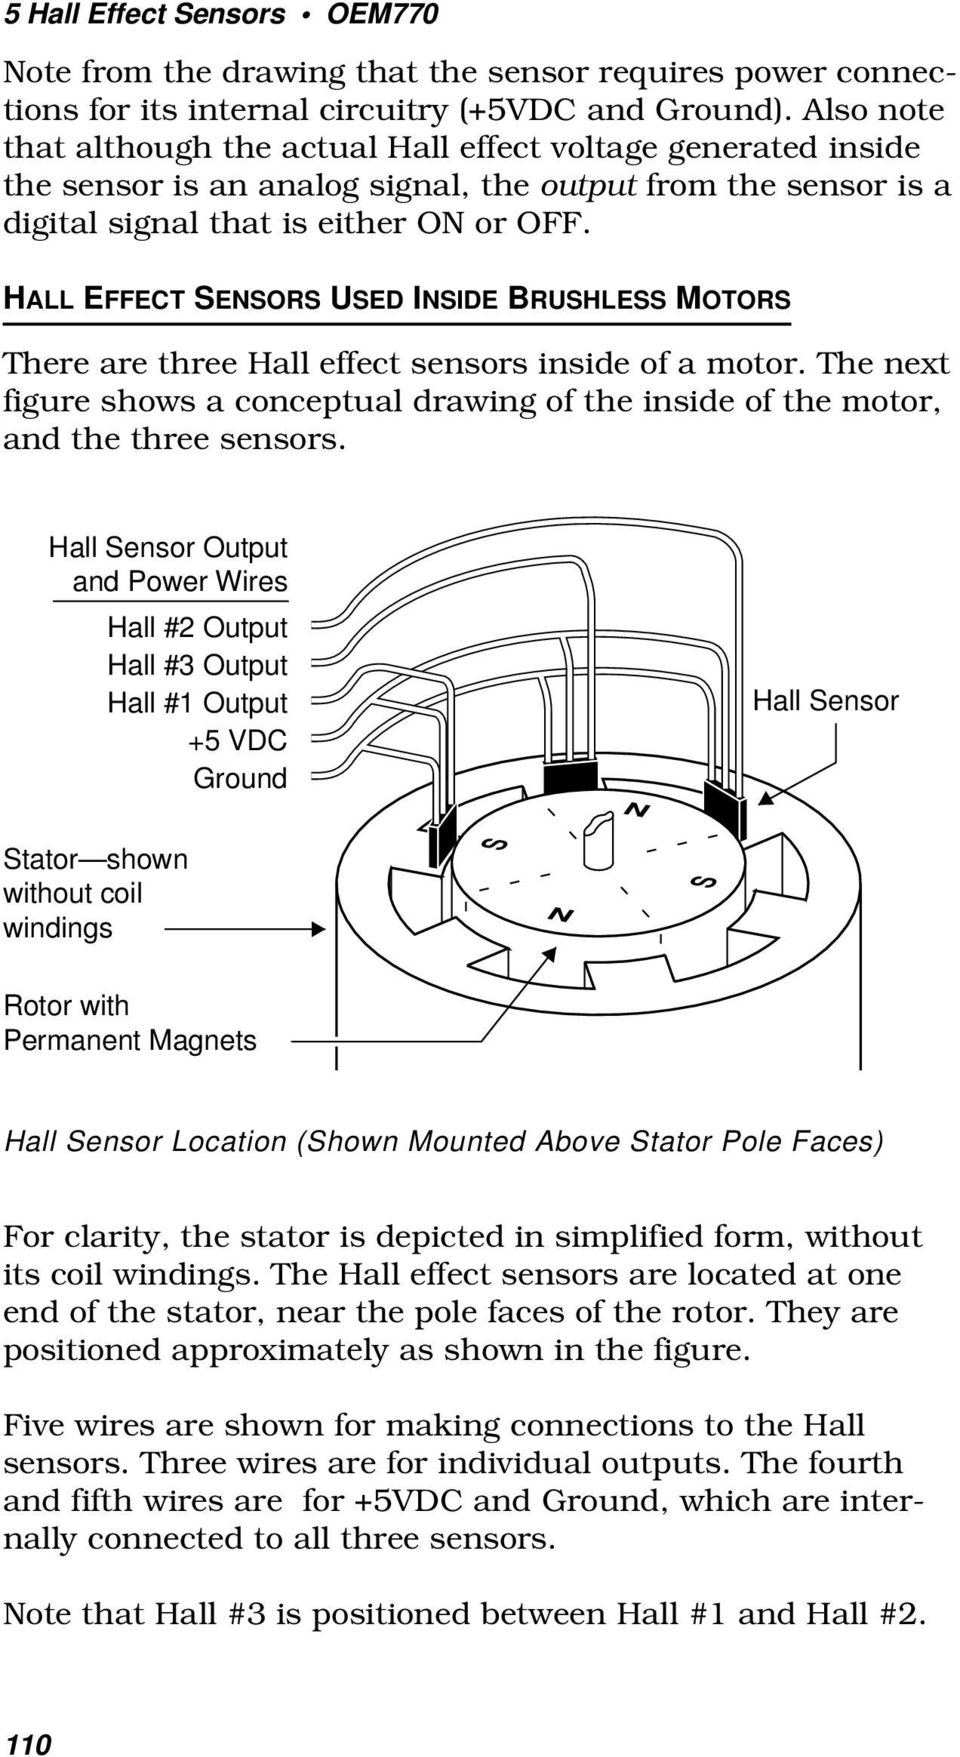 HLL EFFET EOR UED IIDE RUHLE MOTOR There are three Hall effect sensors nsde of a motor. The next fgure shows a conceptual drawng of the nsde of the motor, and the three sensors.